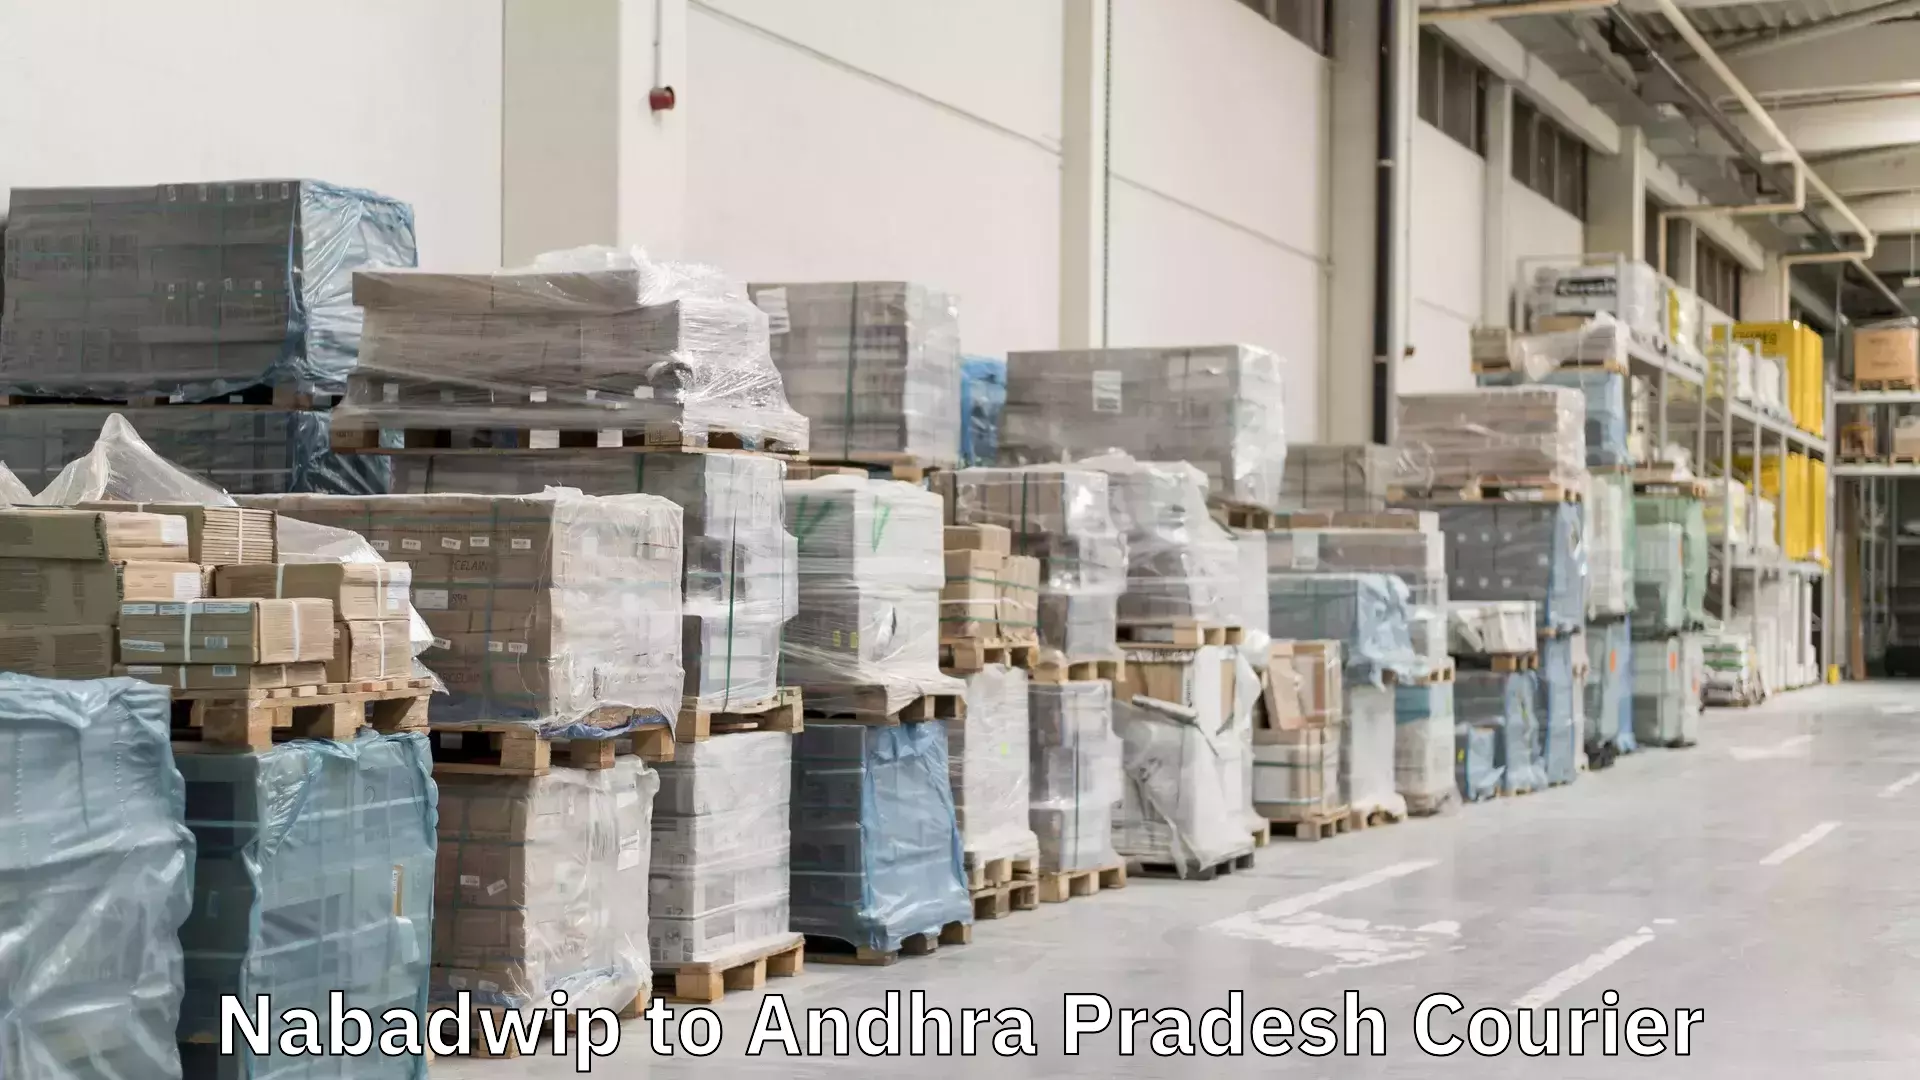 Courier service efficiency Nabadwip to Andhra Pradesh